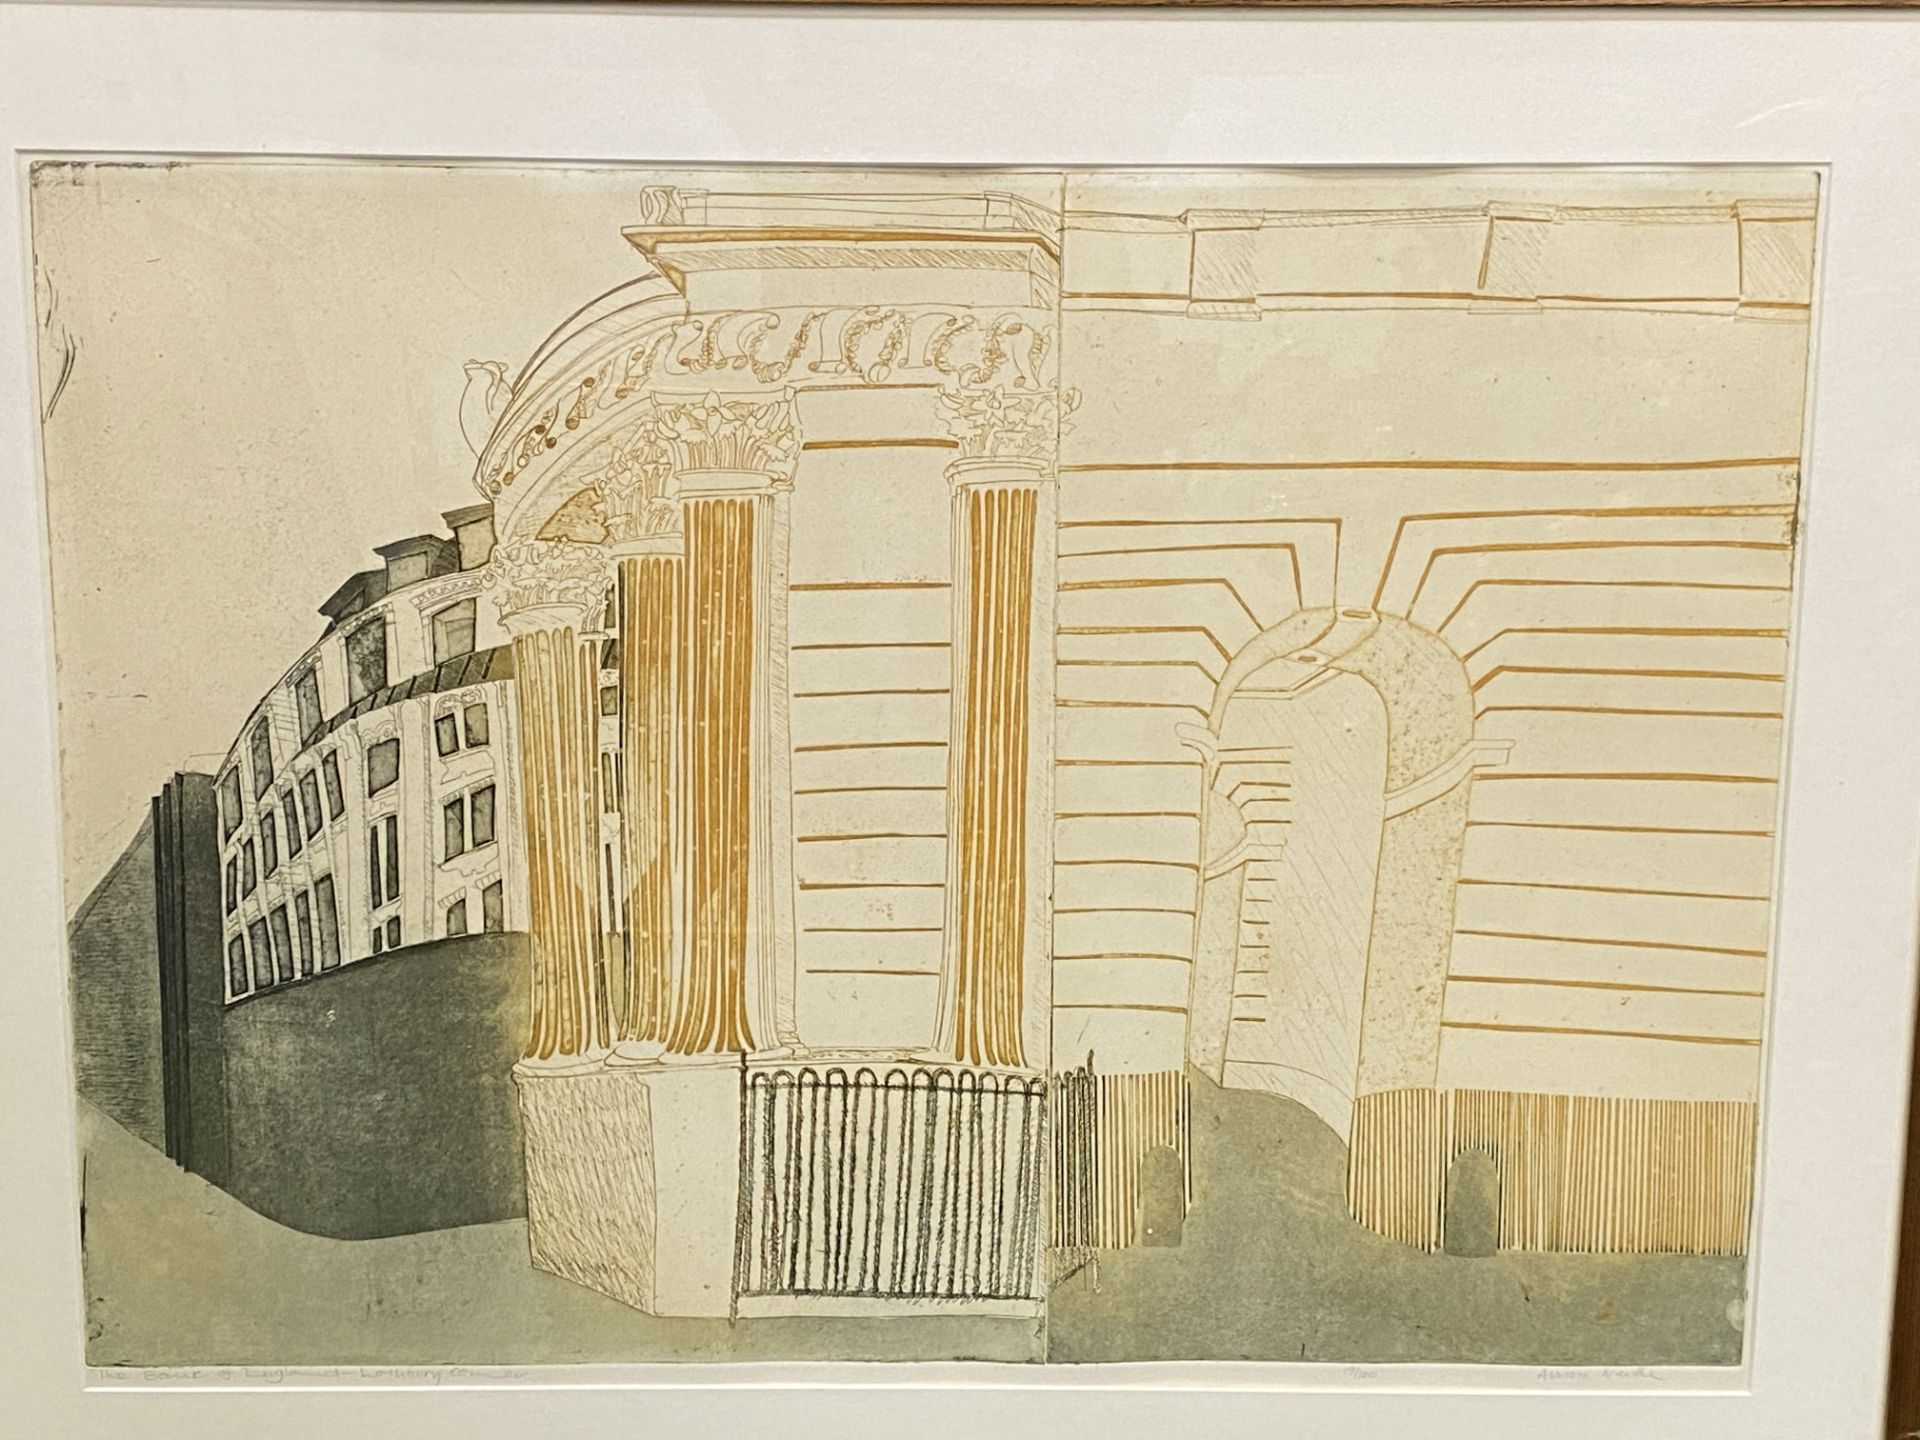 Framed and glazed limited edition print of the Bank of England by Alison Neville - Image 2 of 5